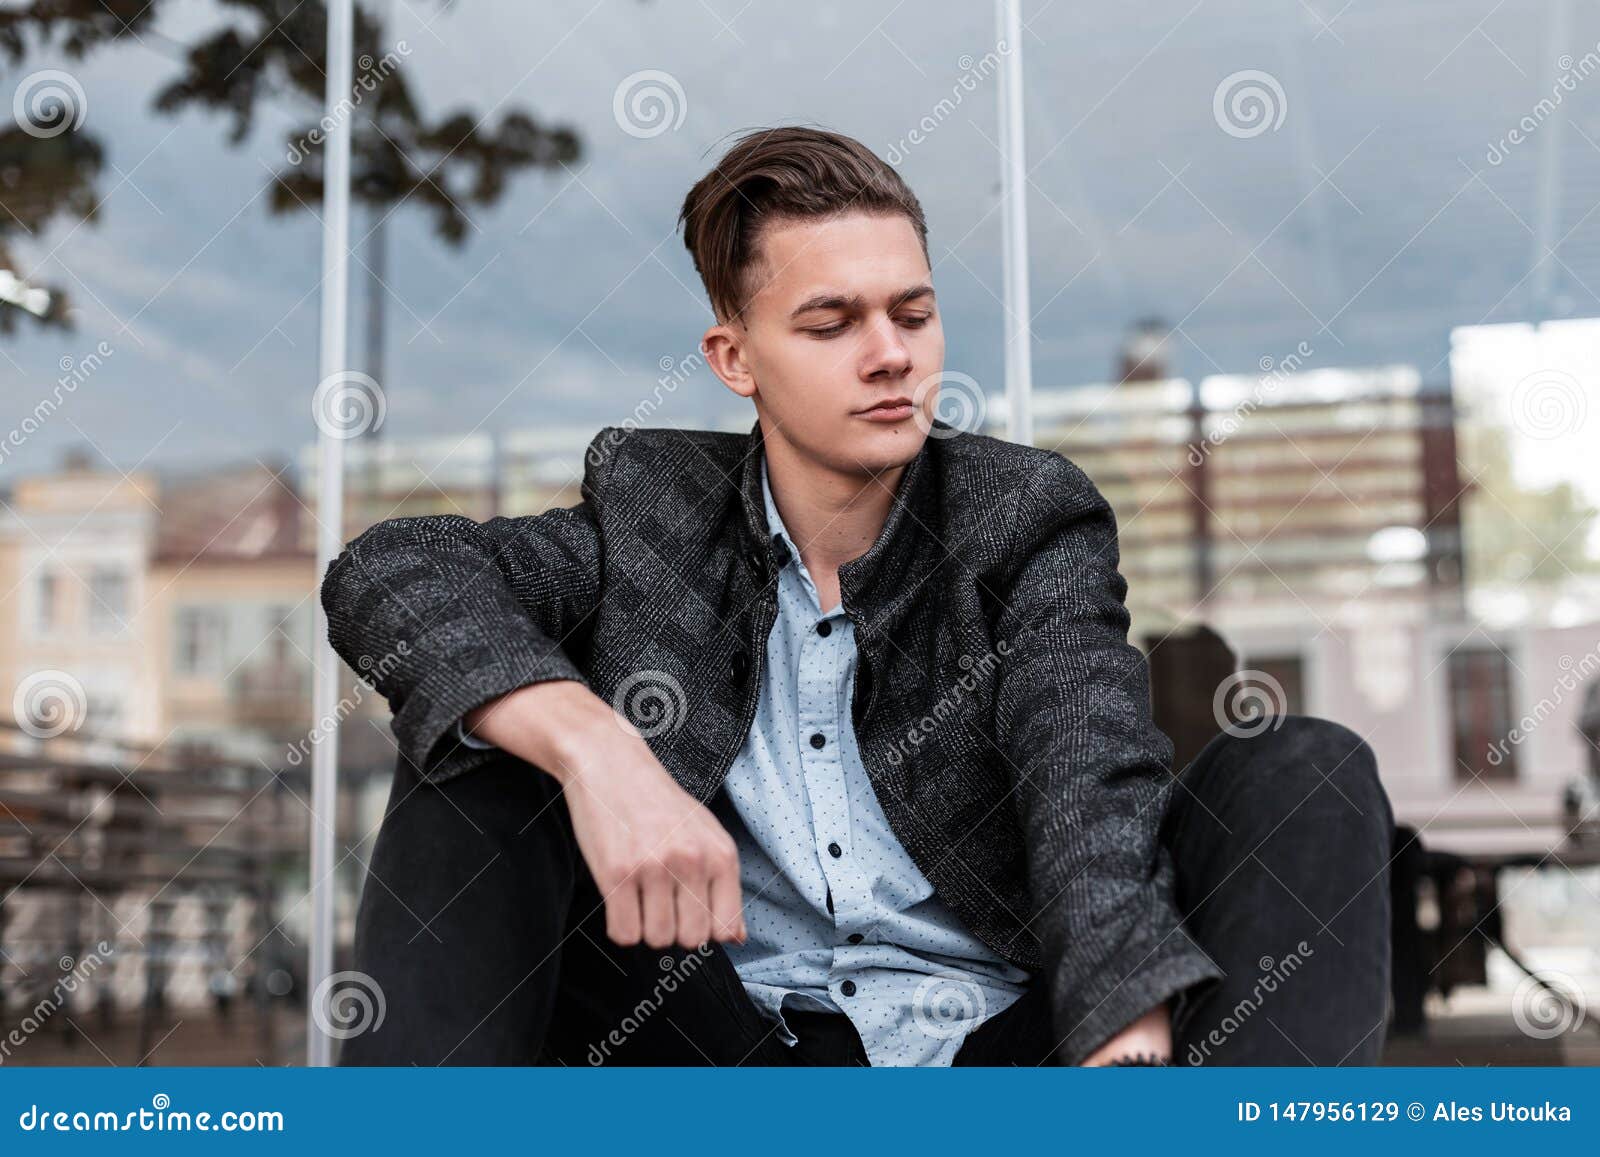 European Handsome Young Man With Trendy Hairstyle In A 